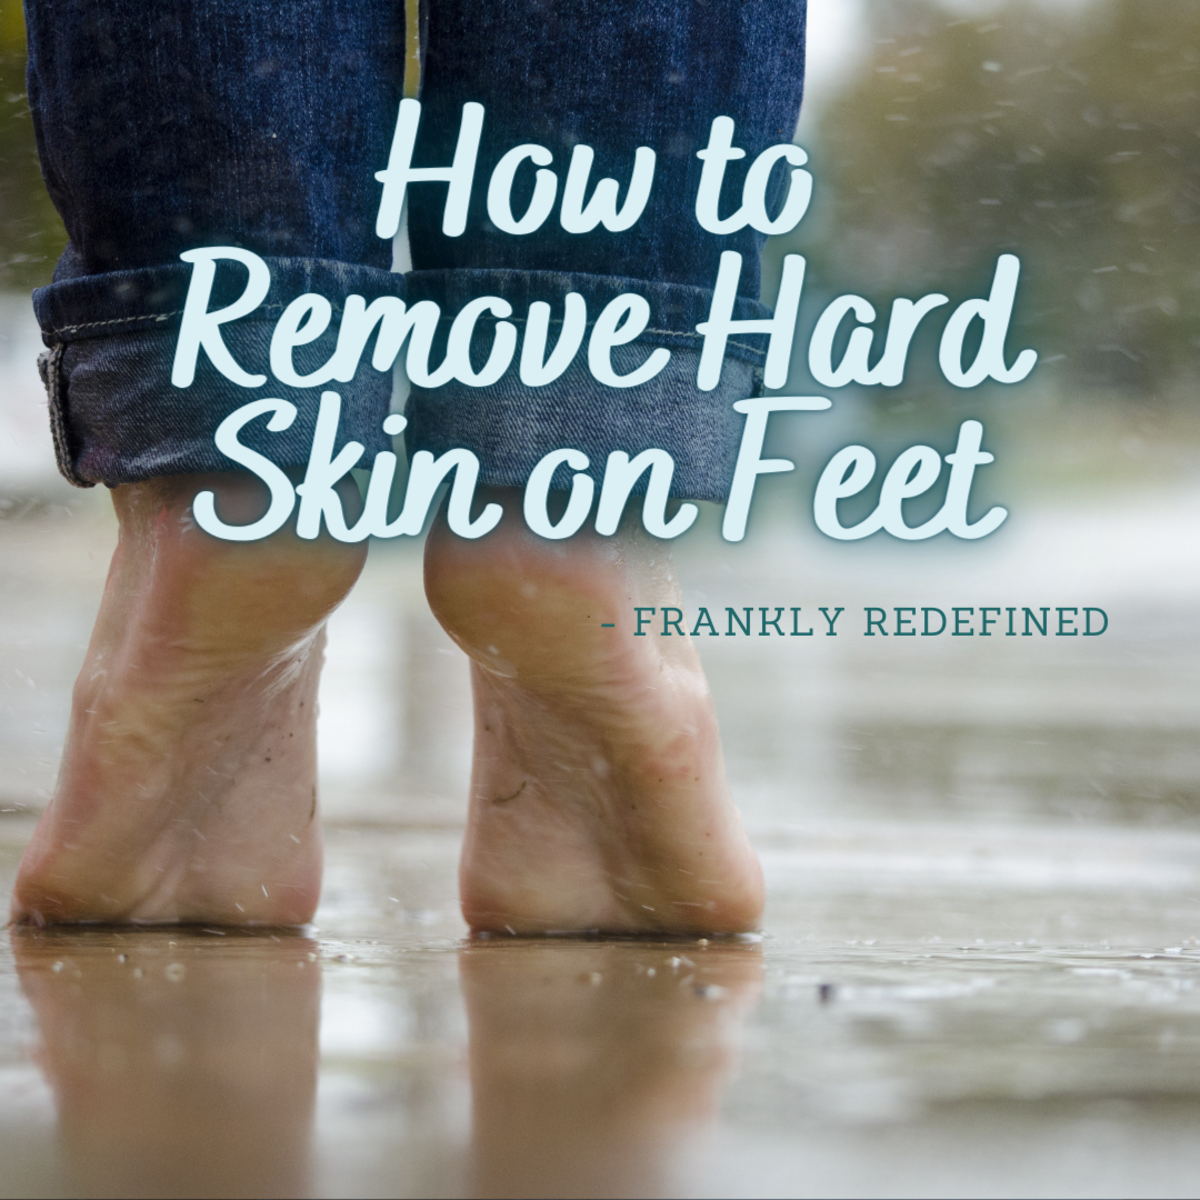 How Can I Remove Hard Skin on My Feet? 7 Homemade Solutions to Try